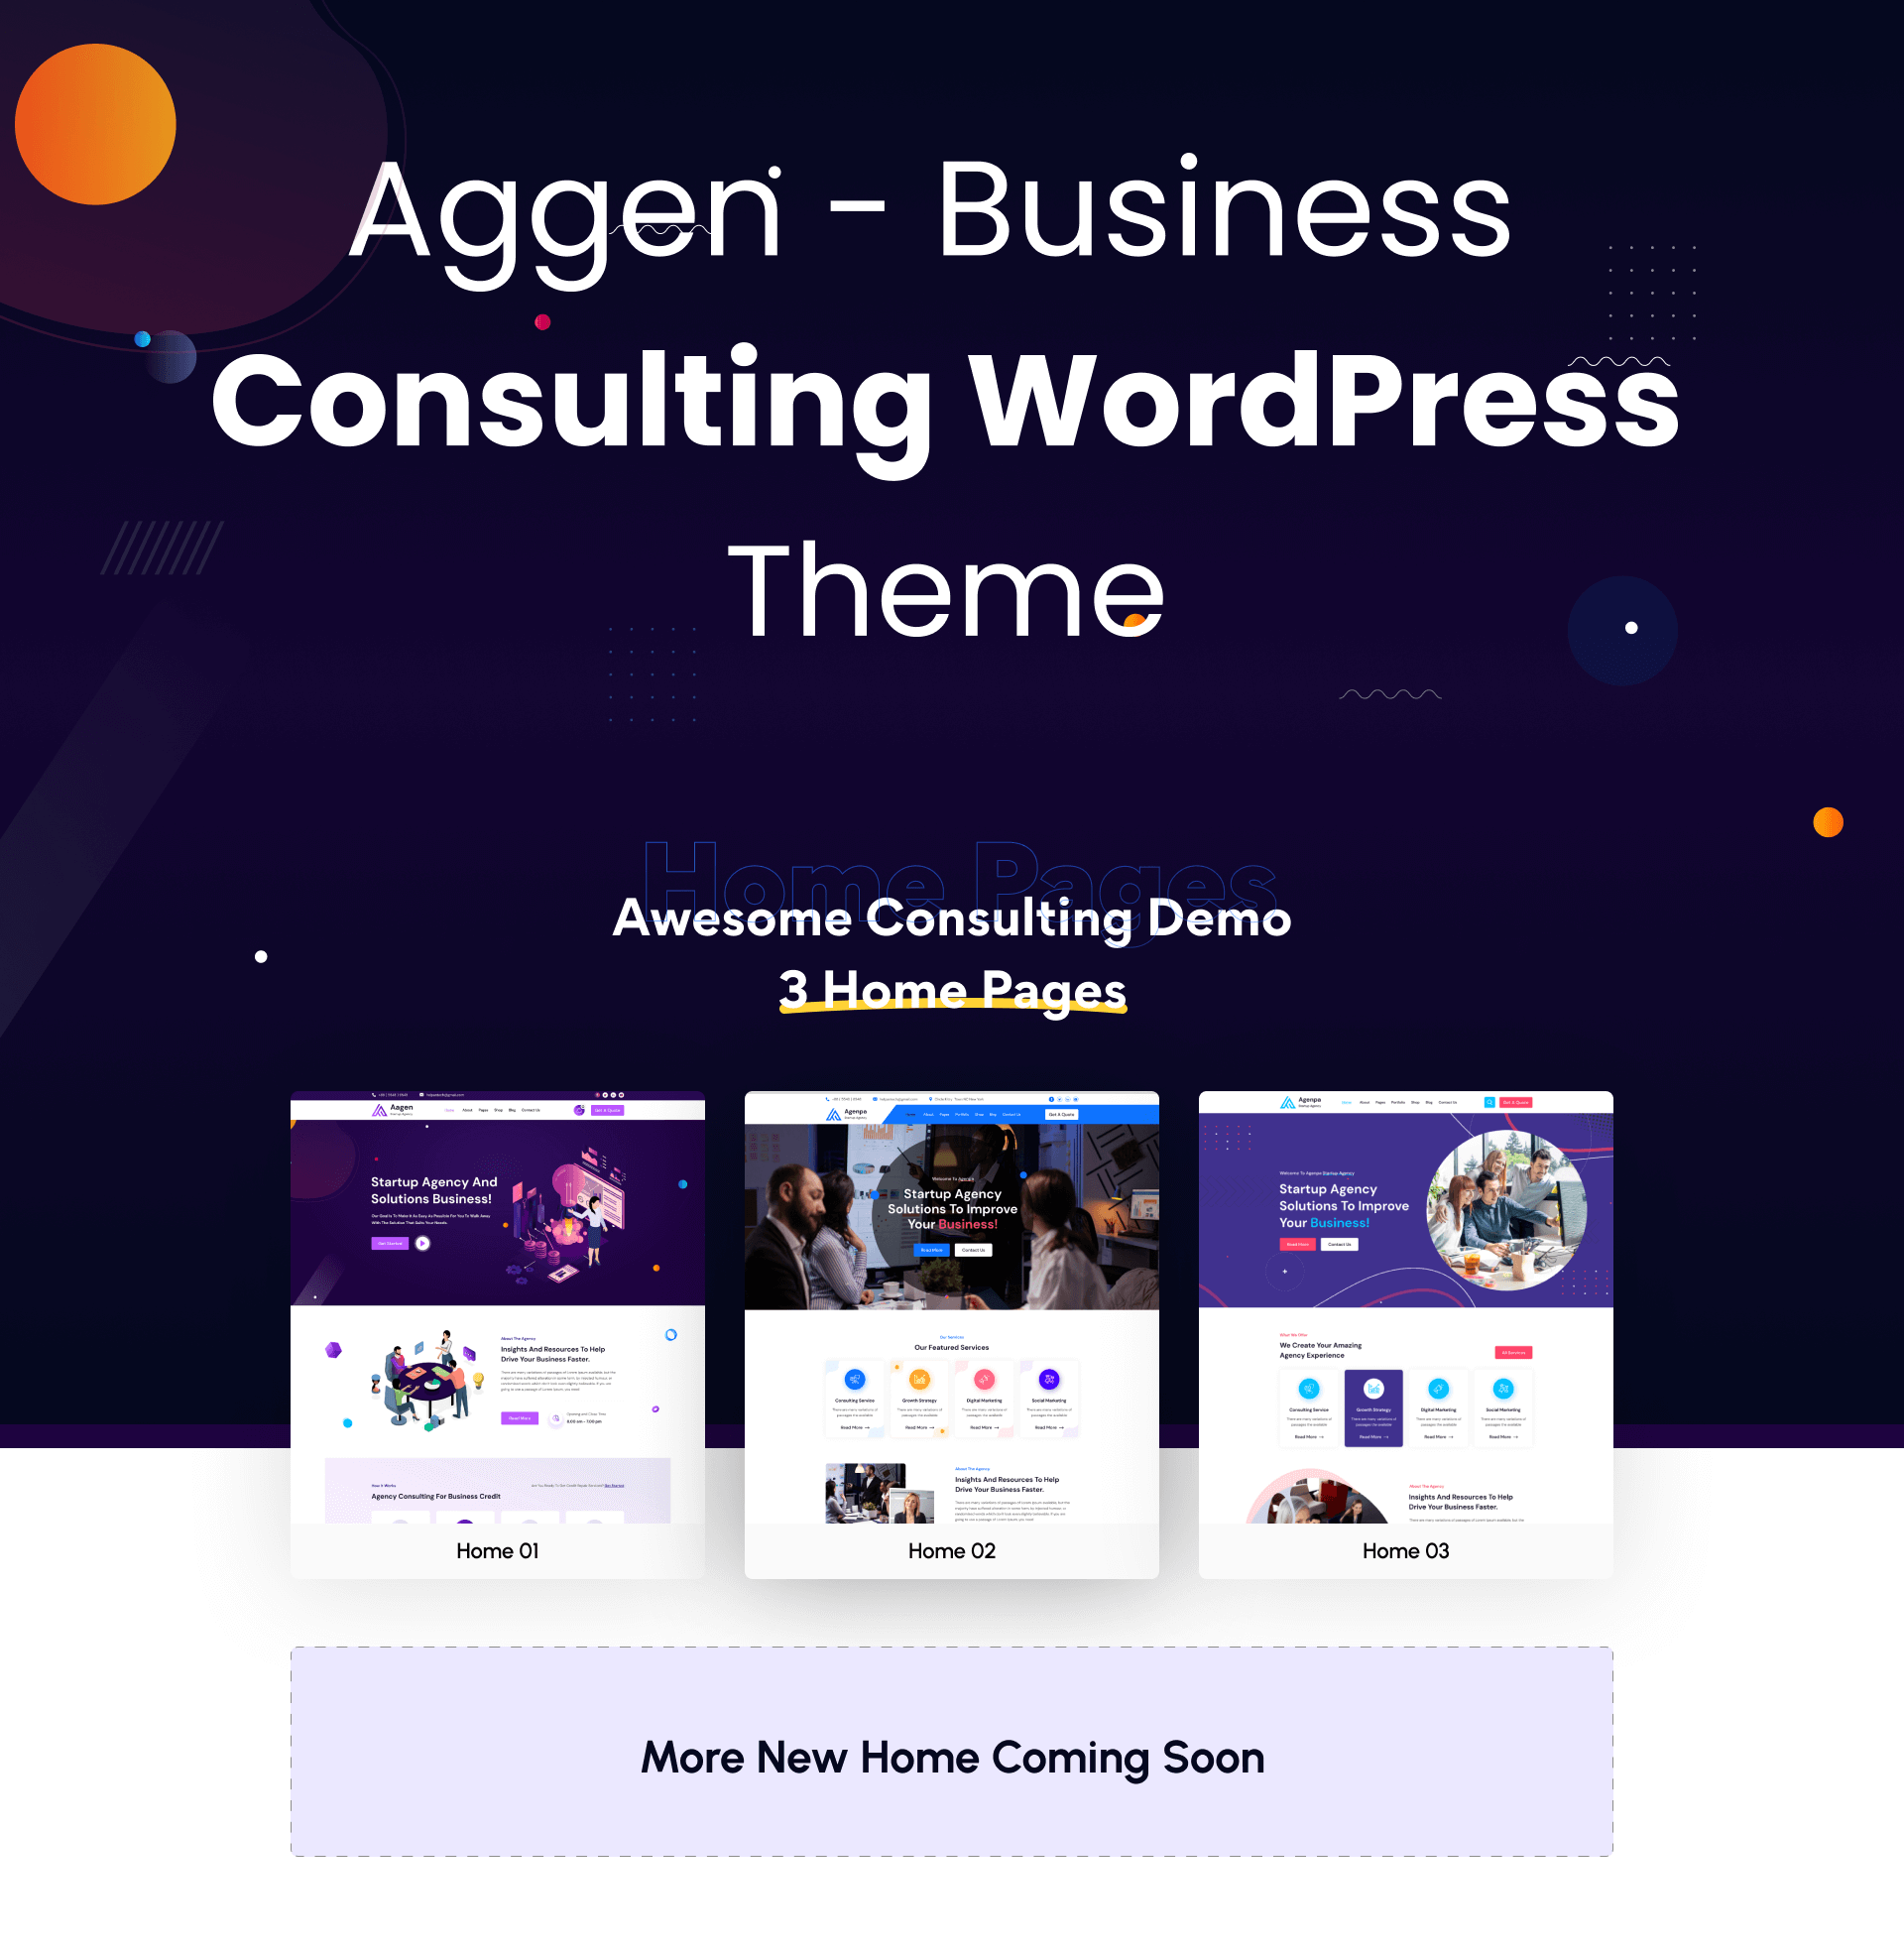 Aggen - Business Consulting WordPress Theme